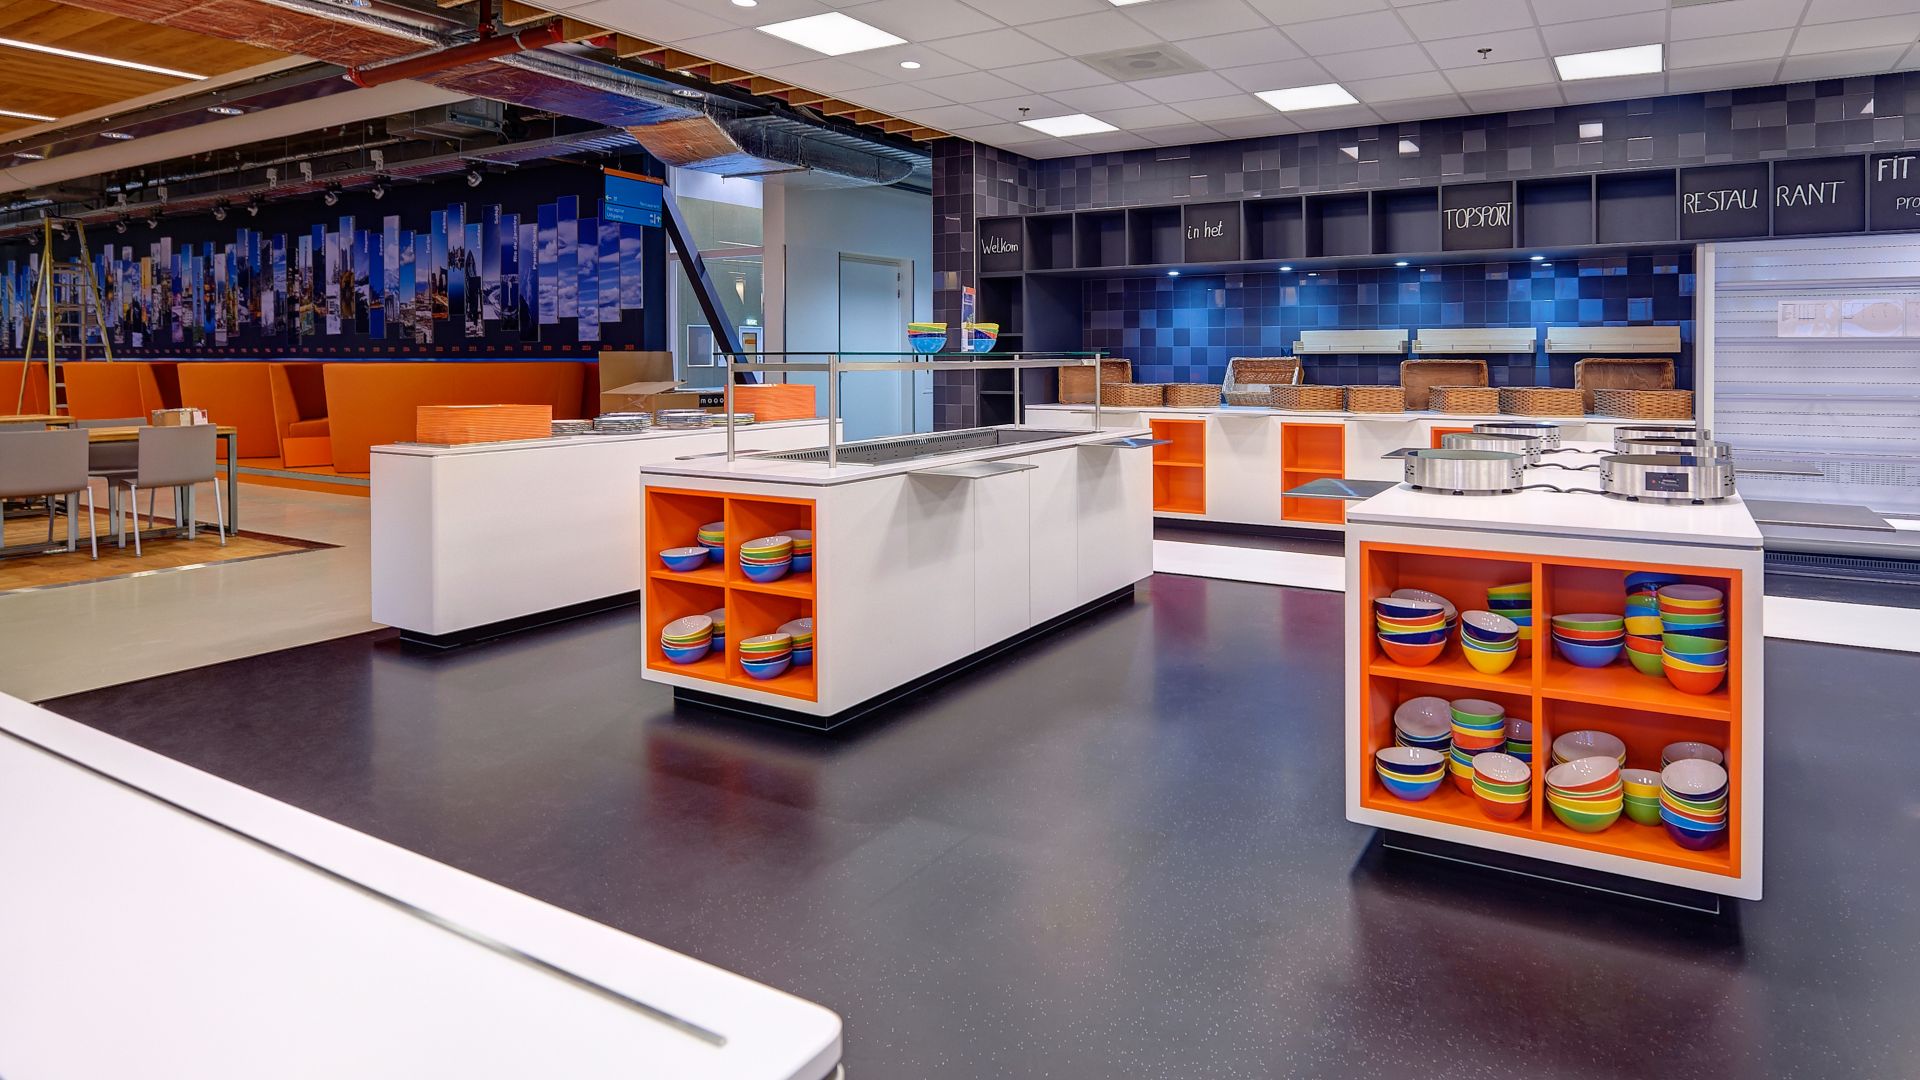 Sales room kitchen restaurant showcase with decorative floor and orange shelves with bowls